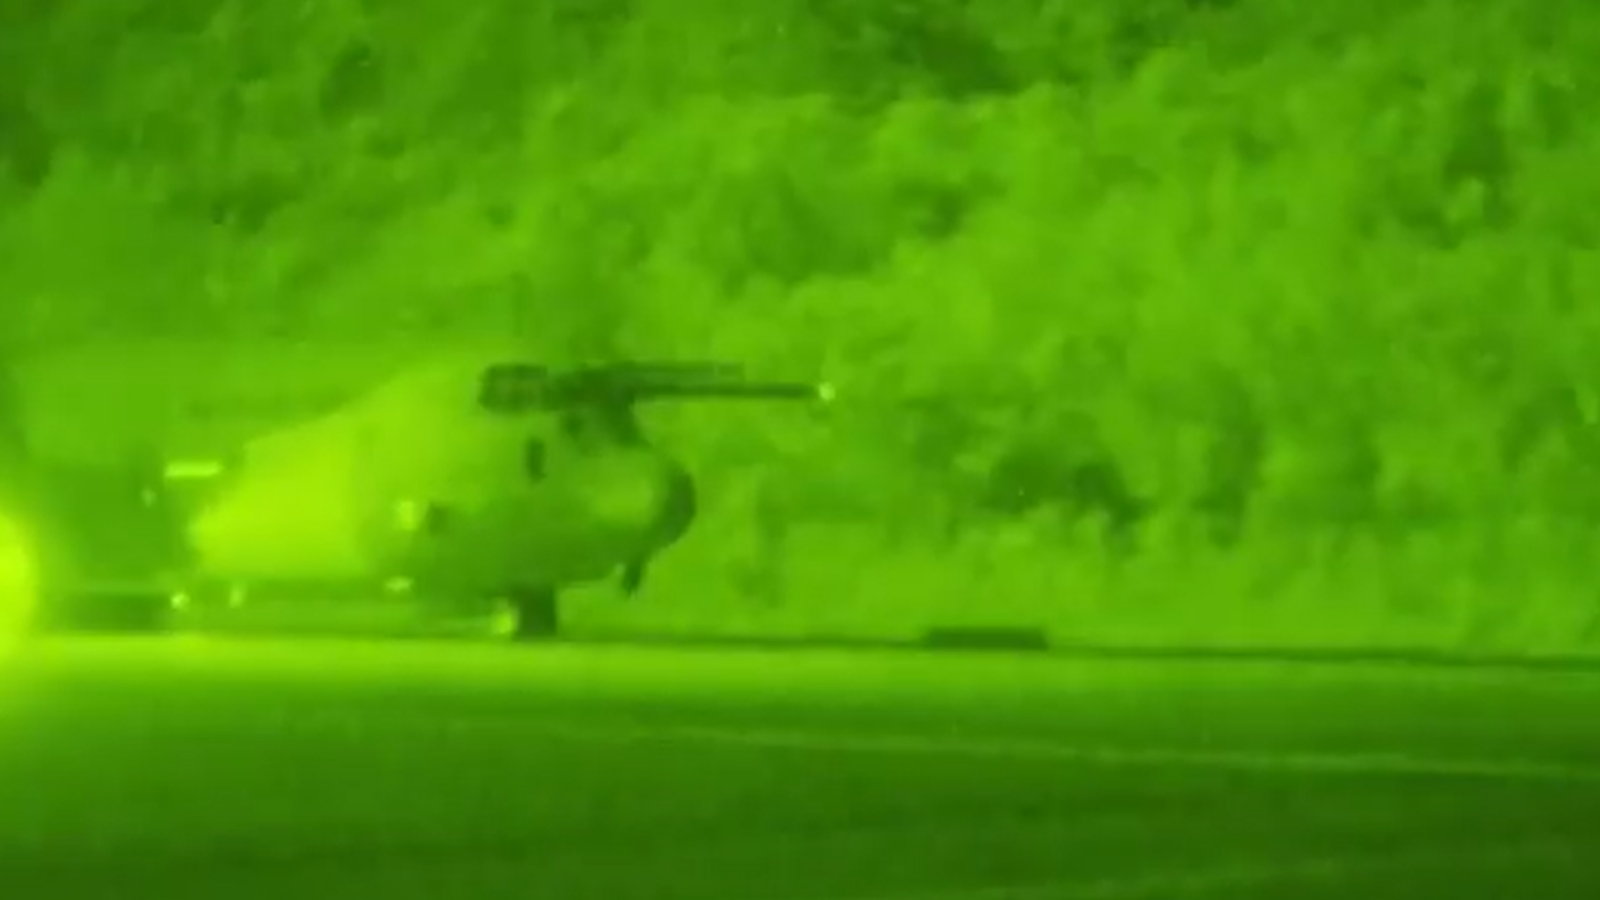 With this technology, planes land at midnight… This achievement of the Air Force is special, watch the video